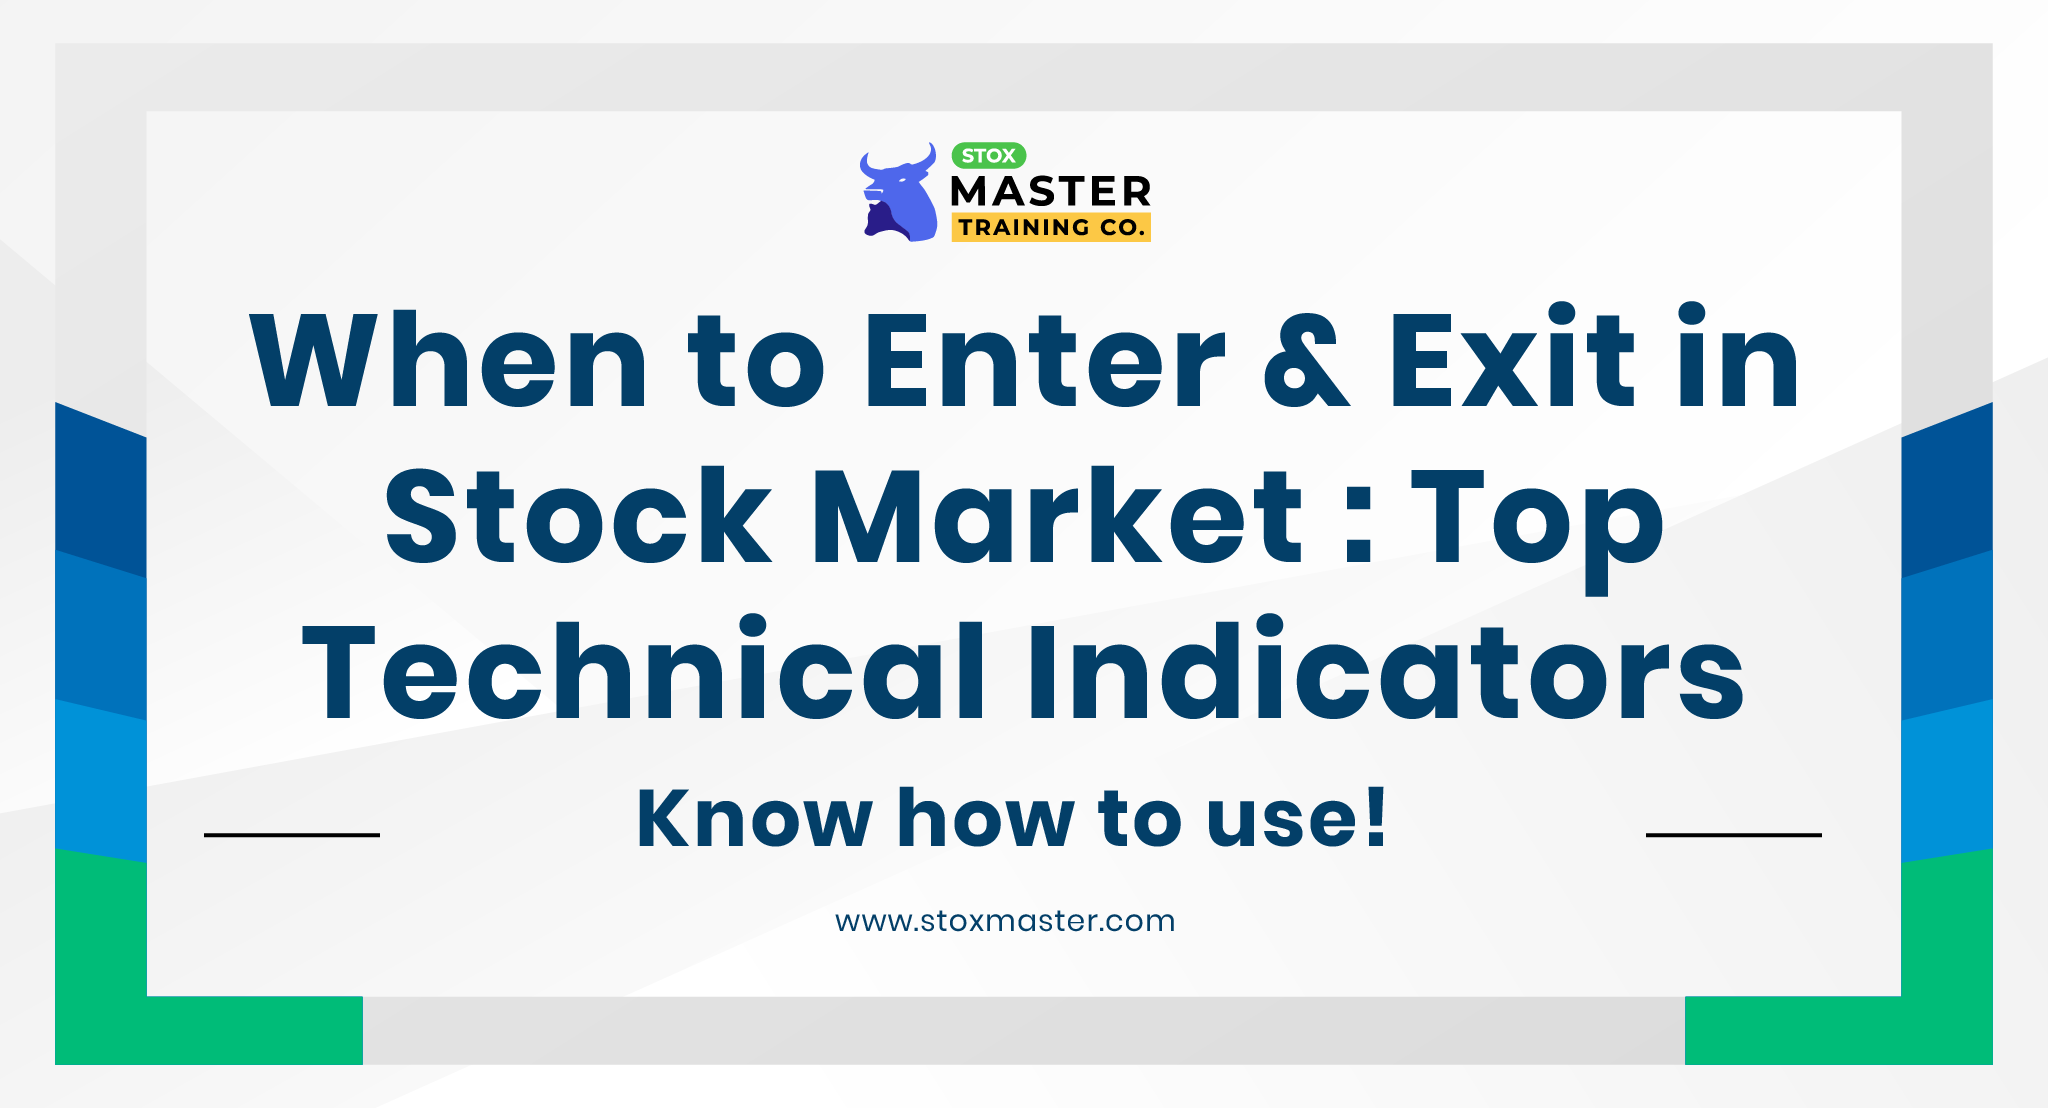 When to Enter & Exit in Stock Market : Know How to use Top Technical Indicators?